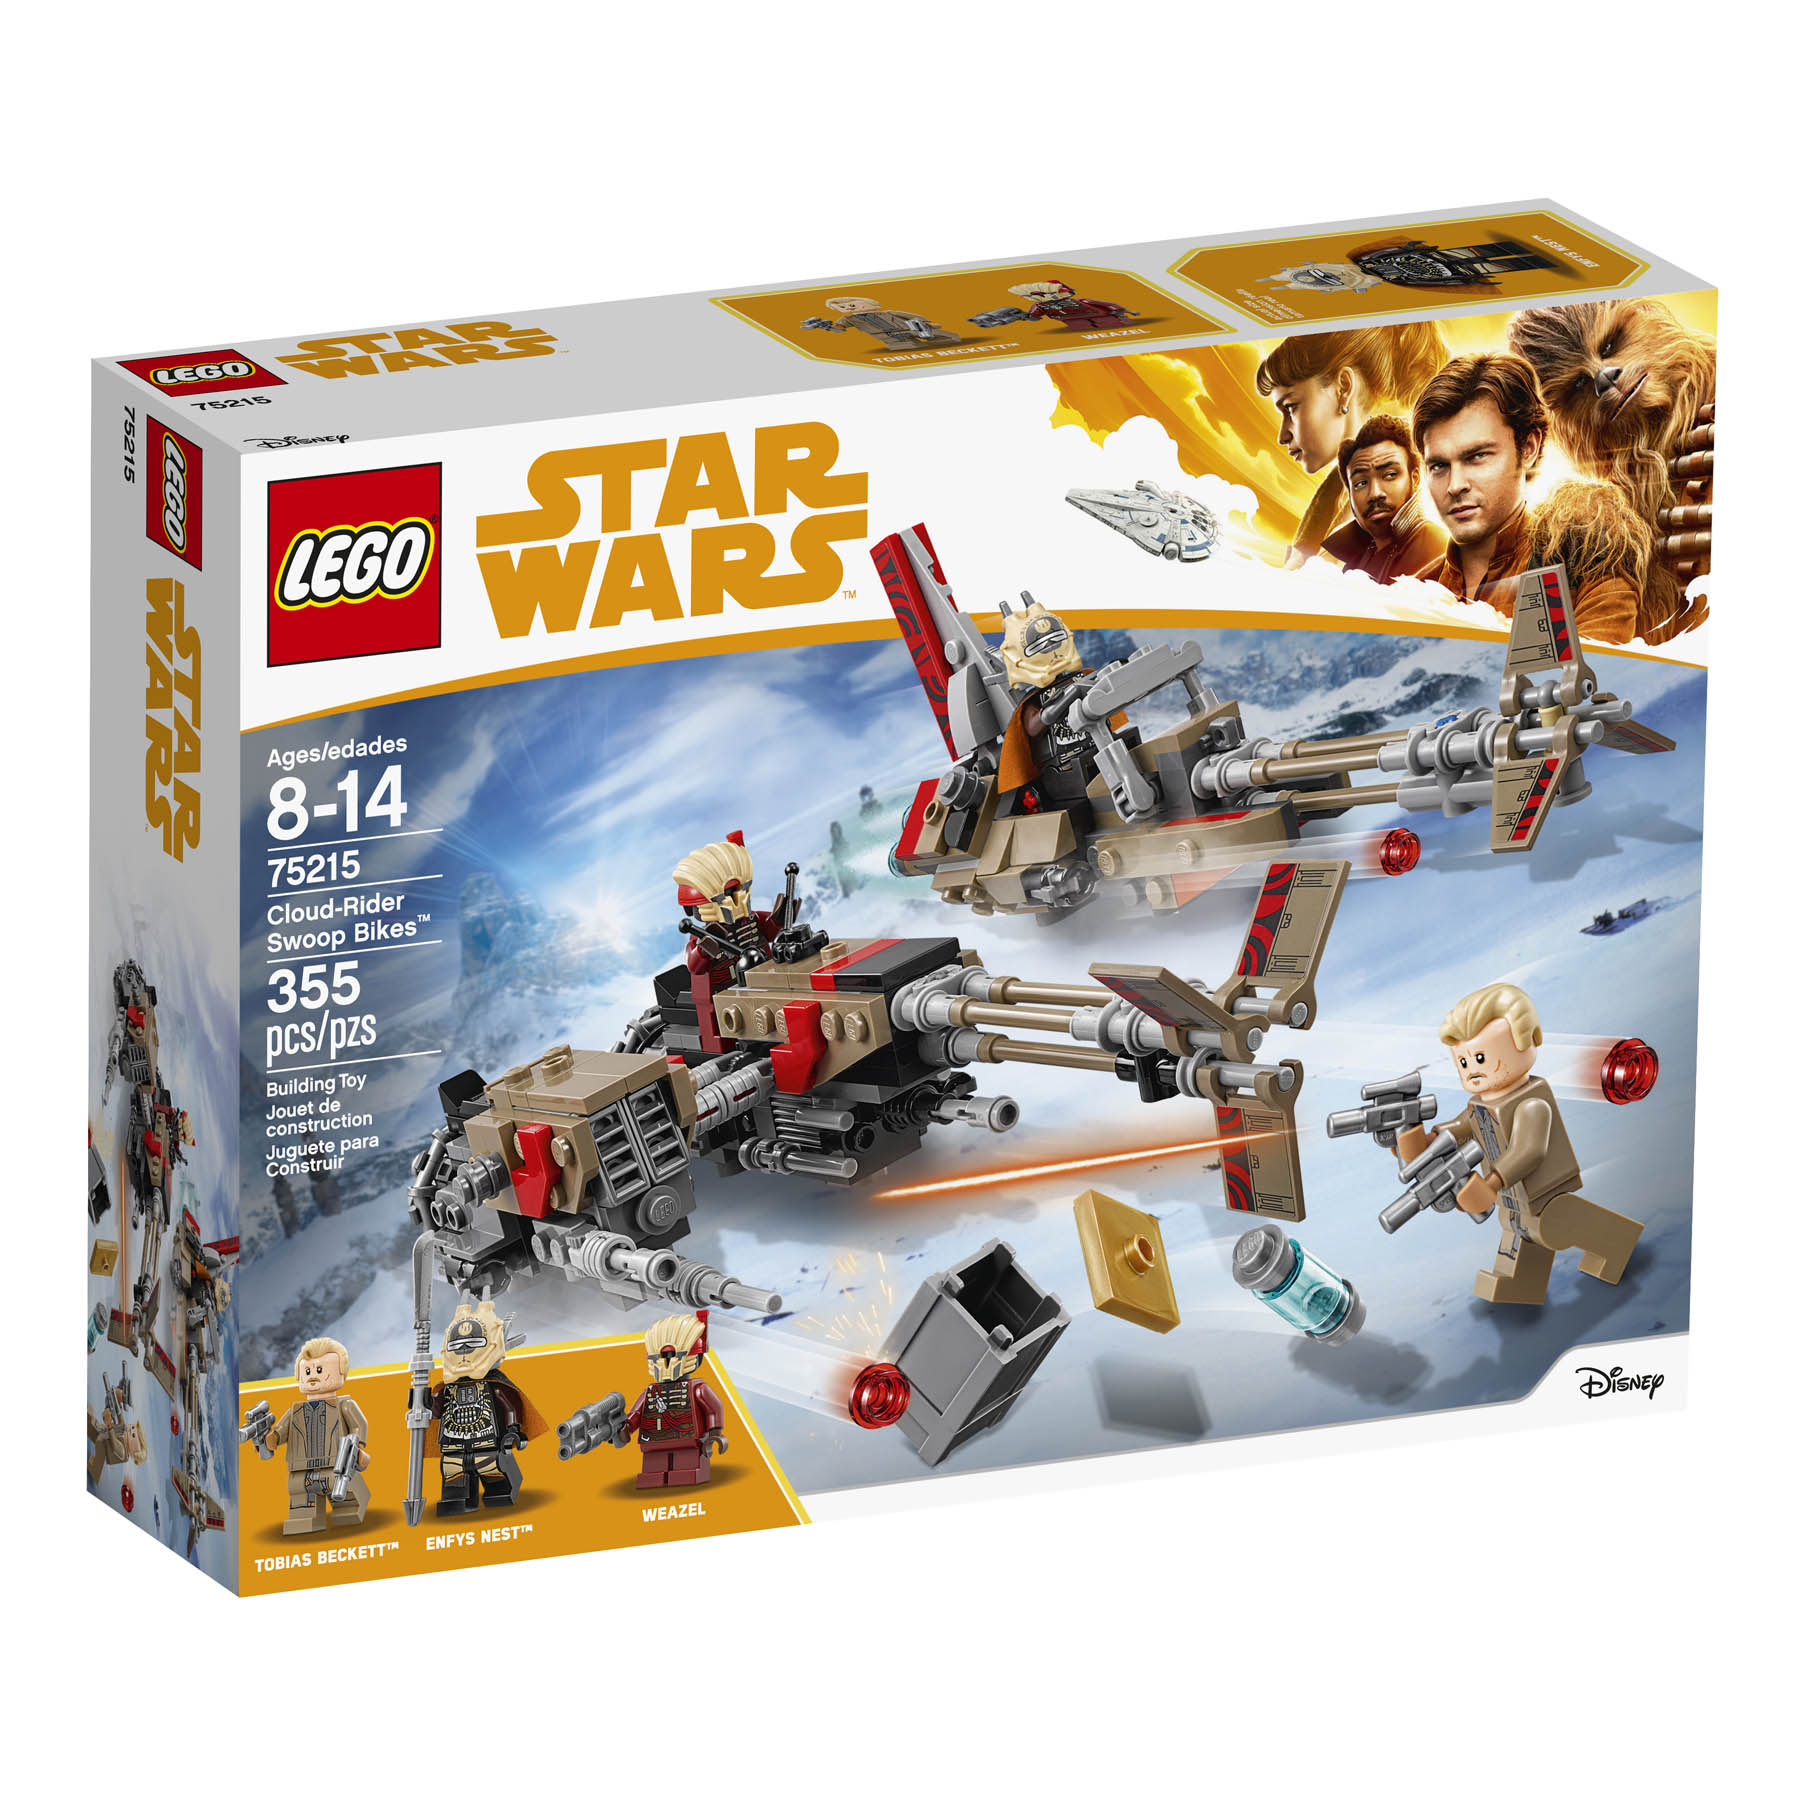 New Solo Sets Revealed - FBTB